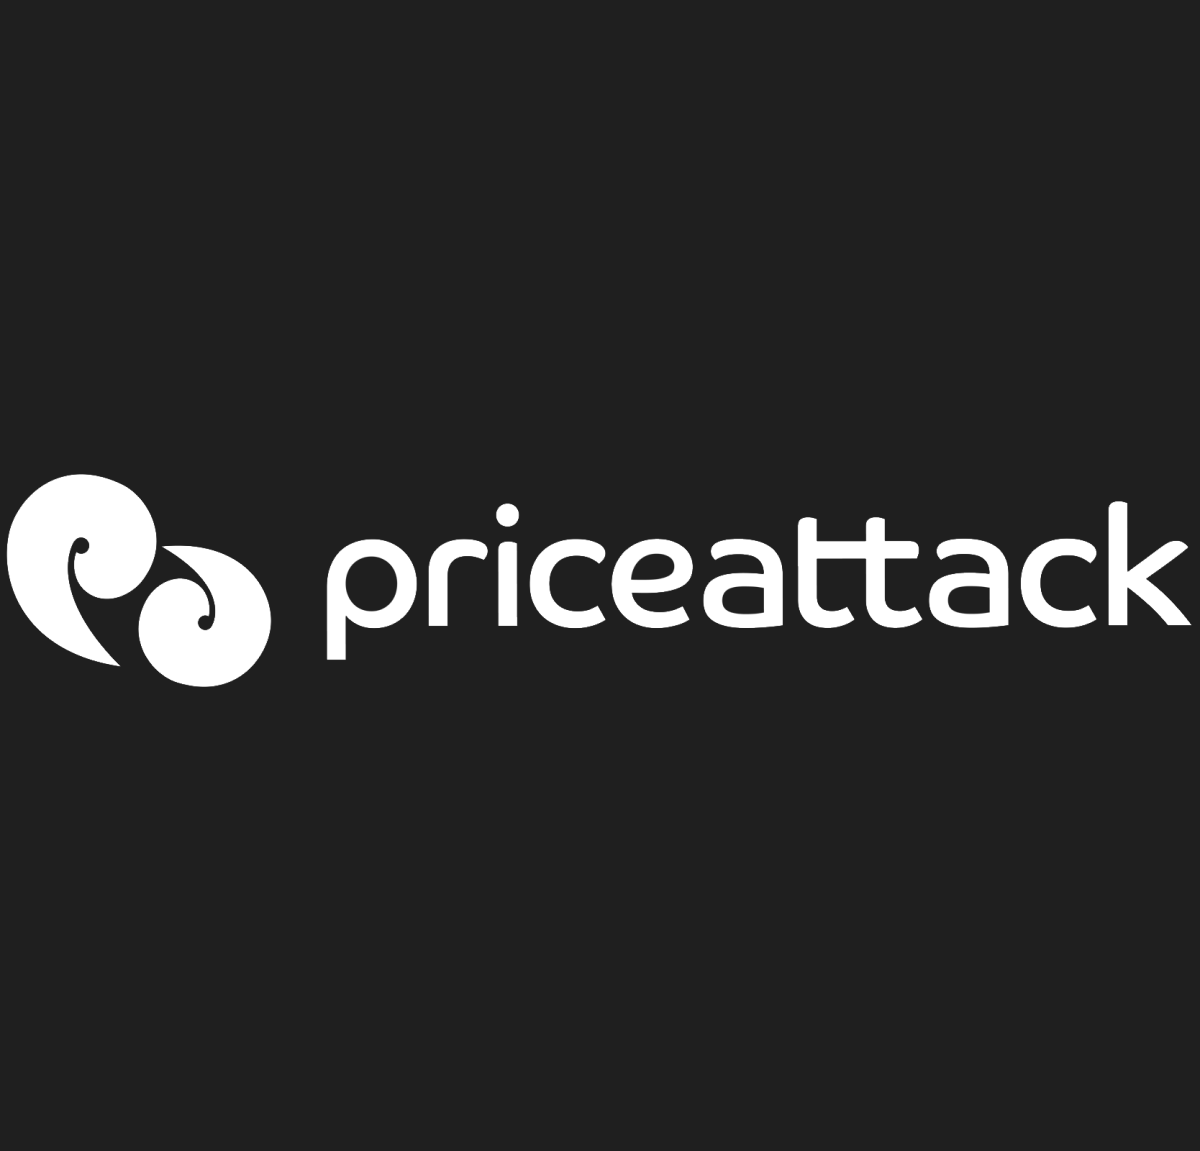 Price Attach_LOGO.png